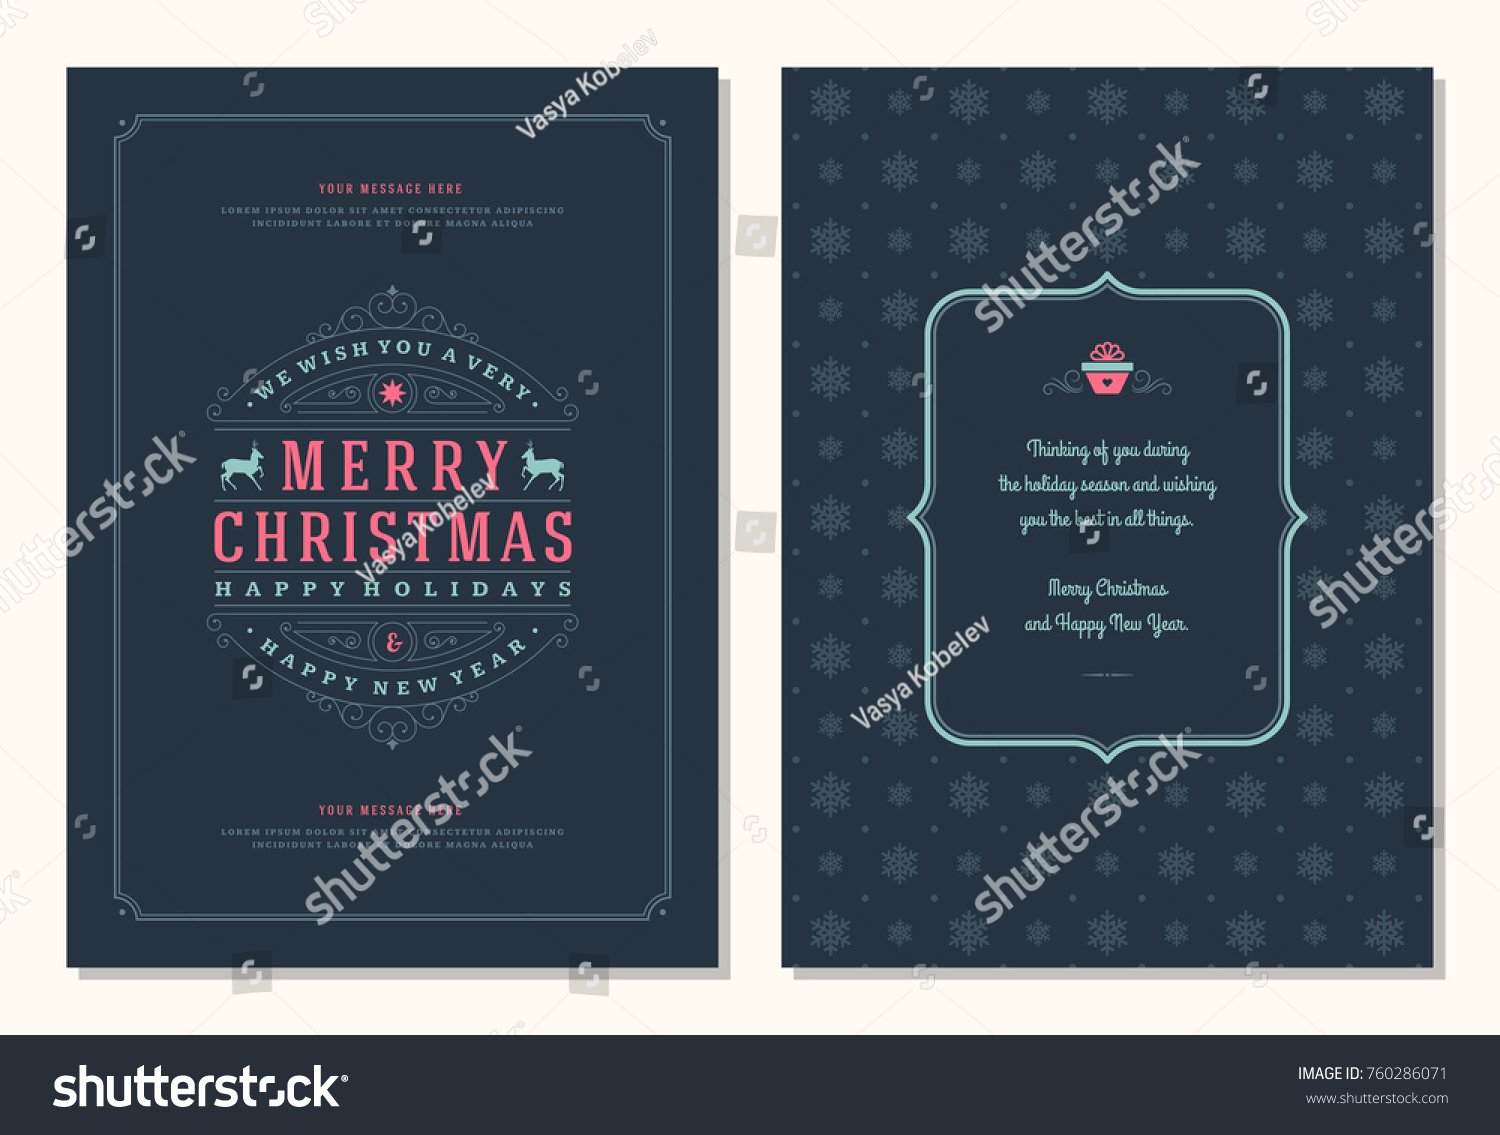 Christmas greeting card design template. Merry Christmas and holidays wishes retro typographic label and place for text. Vector illustration. #760286071